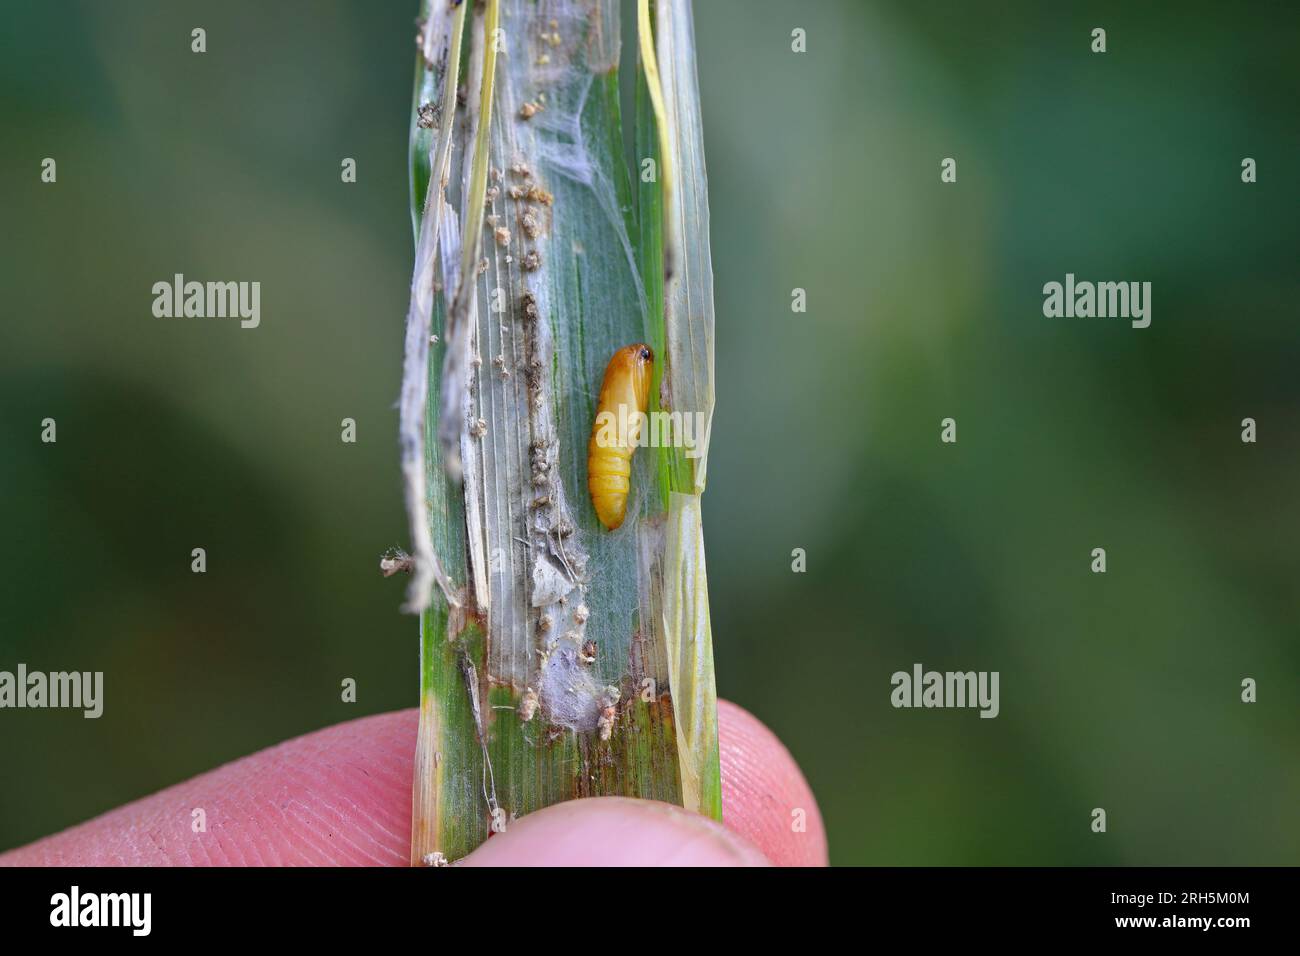 A stem of barley damaged by a caterpillar of meadow shade moth (Cnephasia pasiuana). Its pupa is visible. Stock Photo